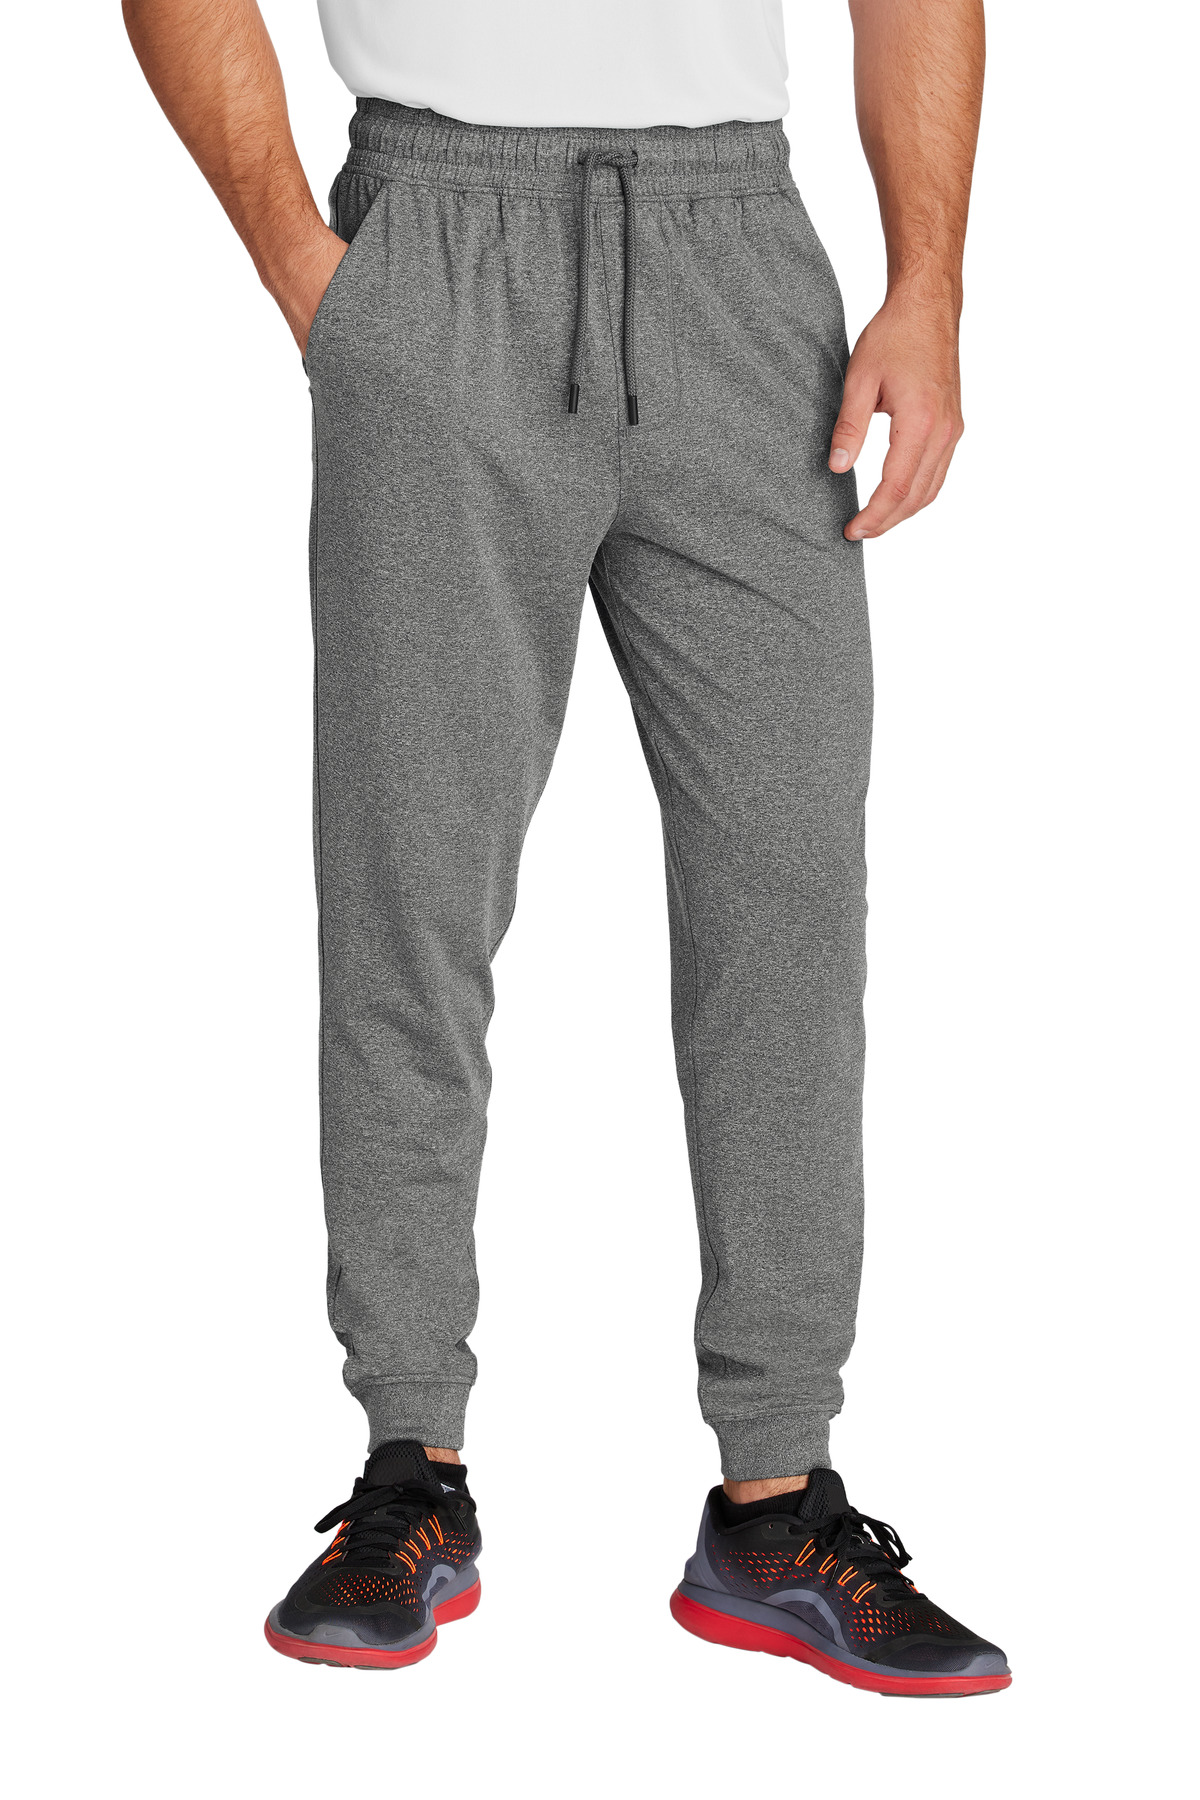 click to view Charcoal Grey Heather